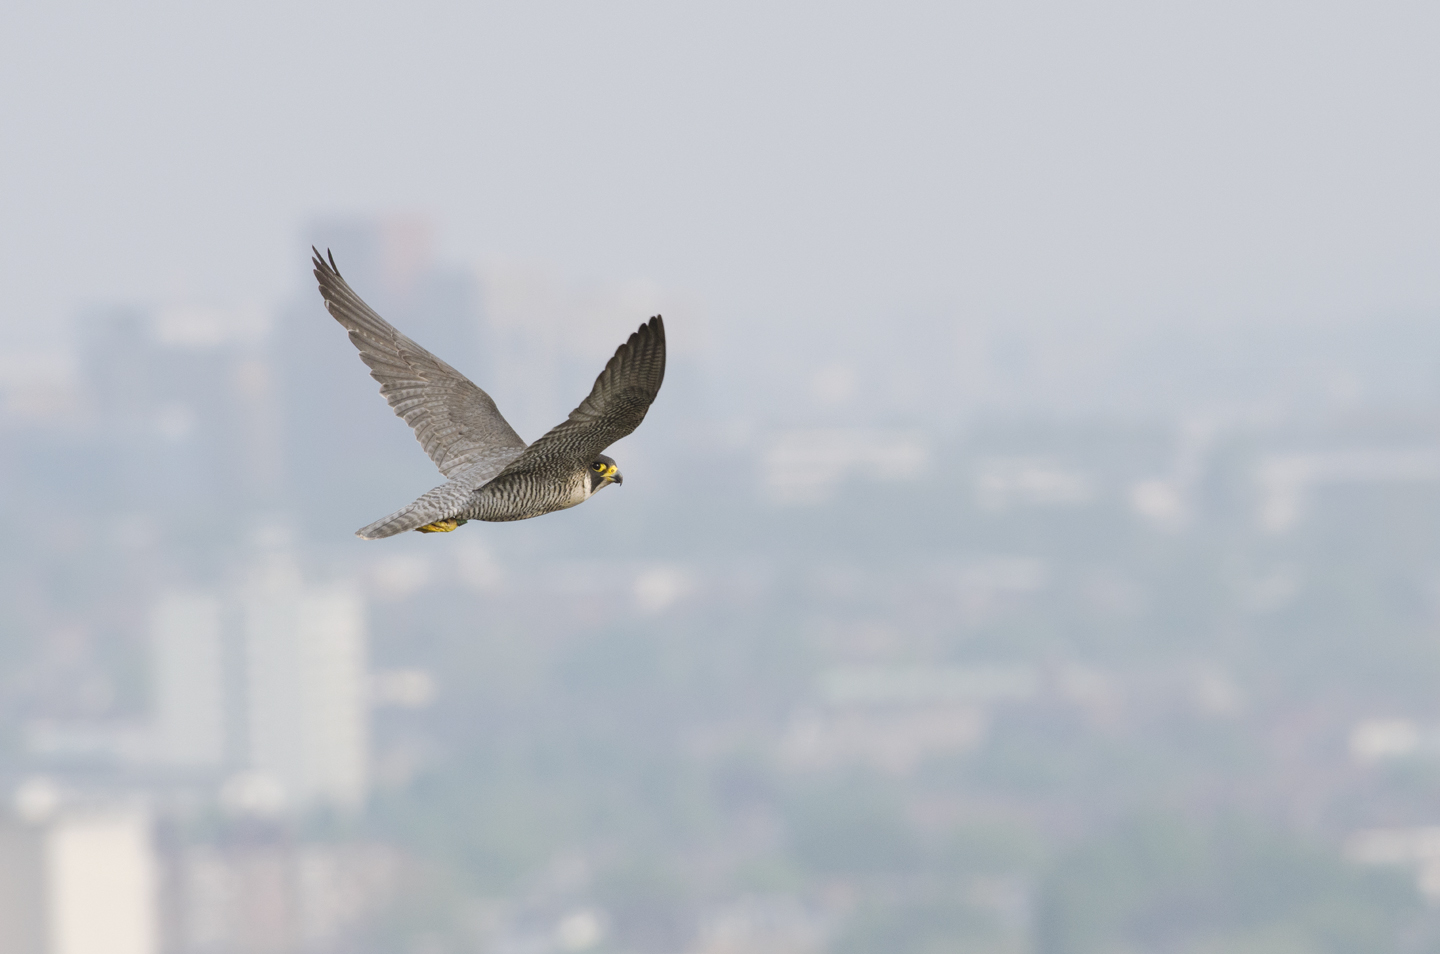  Peregrines are not entirely free from persecution in cities and&nbsp;pigeon fanciers can occasionally be a problem, but they are comparatively safe&nbsp;and an&nbsp;increase in numbers has meant an increase in understanding 